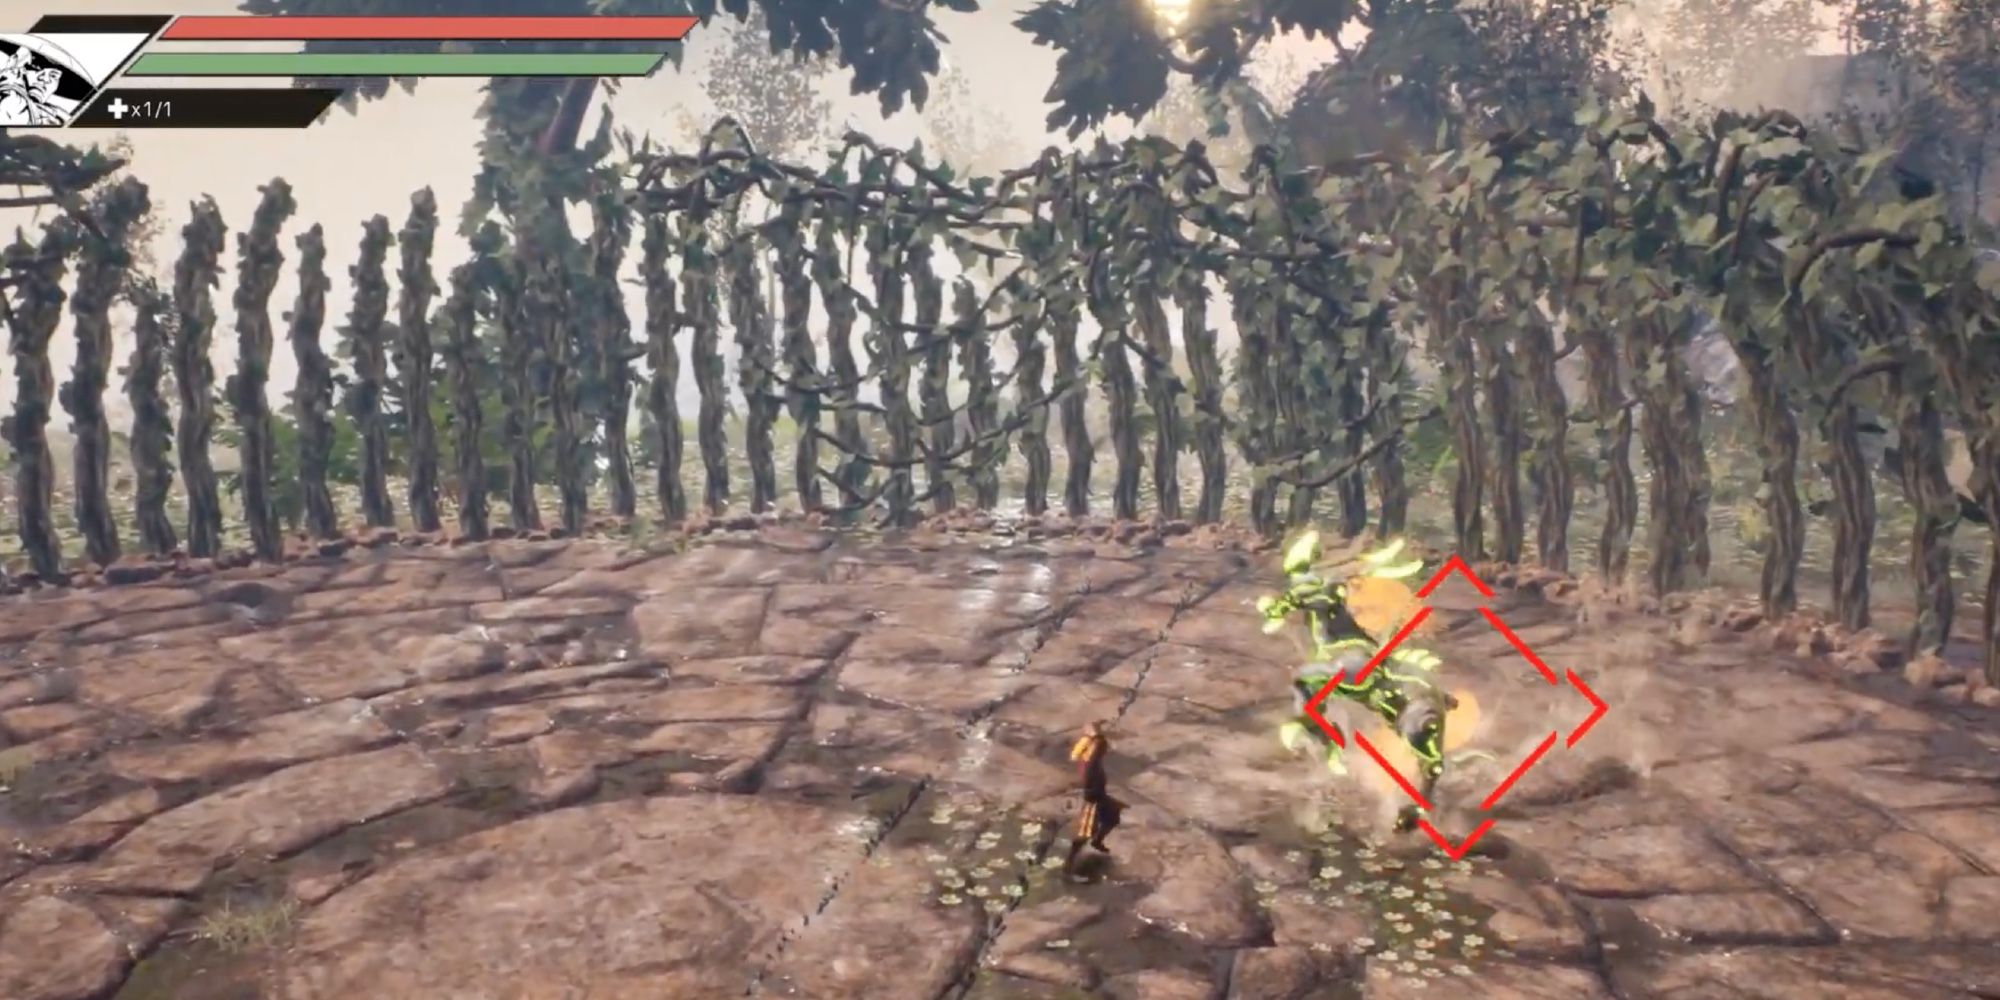 Player hits Kirin with melee attacks to defeat the boss in battle